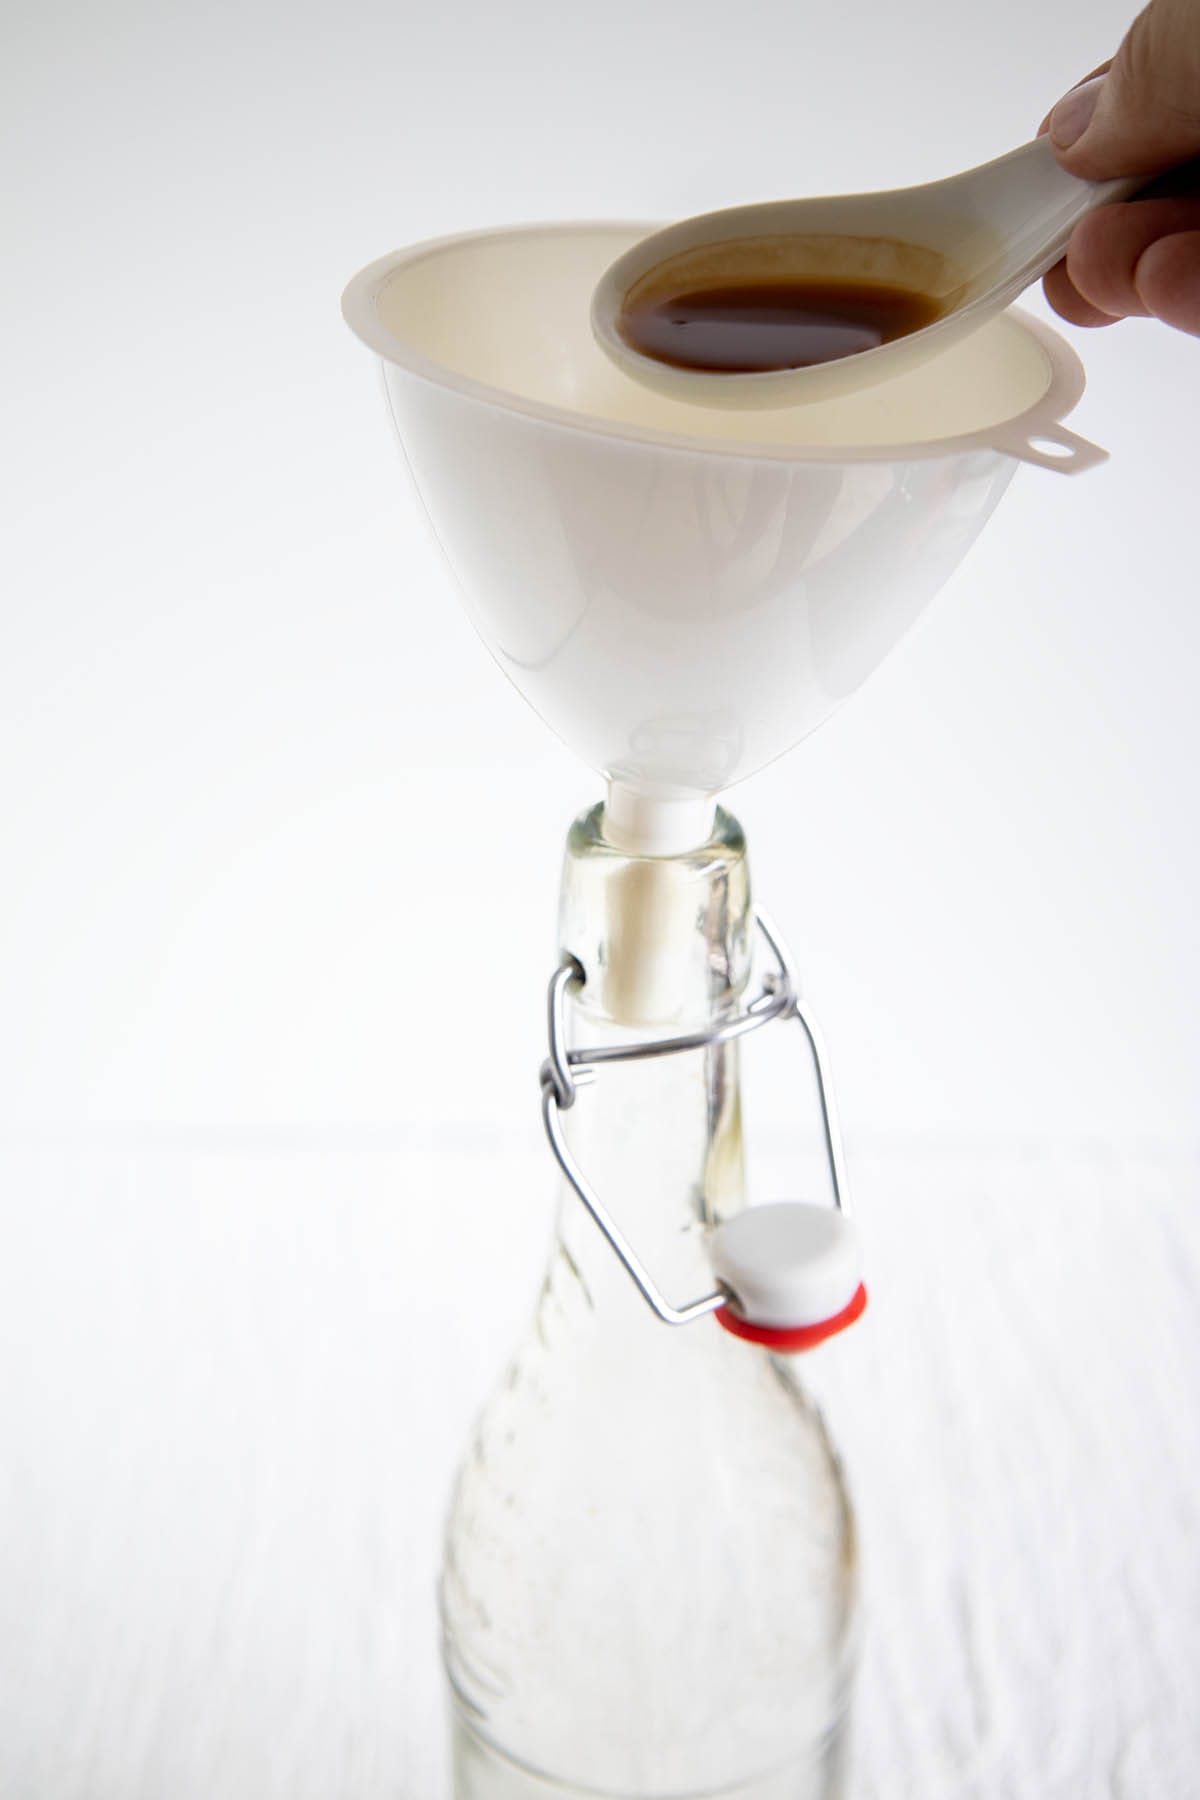 Vanilla extract being poured into a funnel into a bottle.